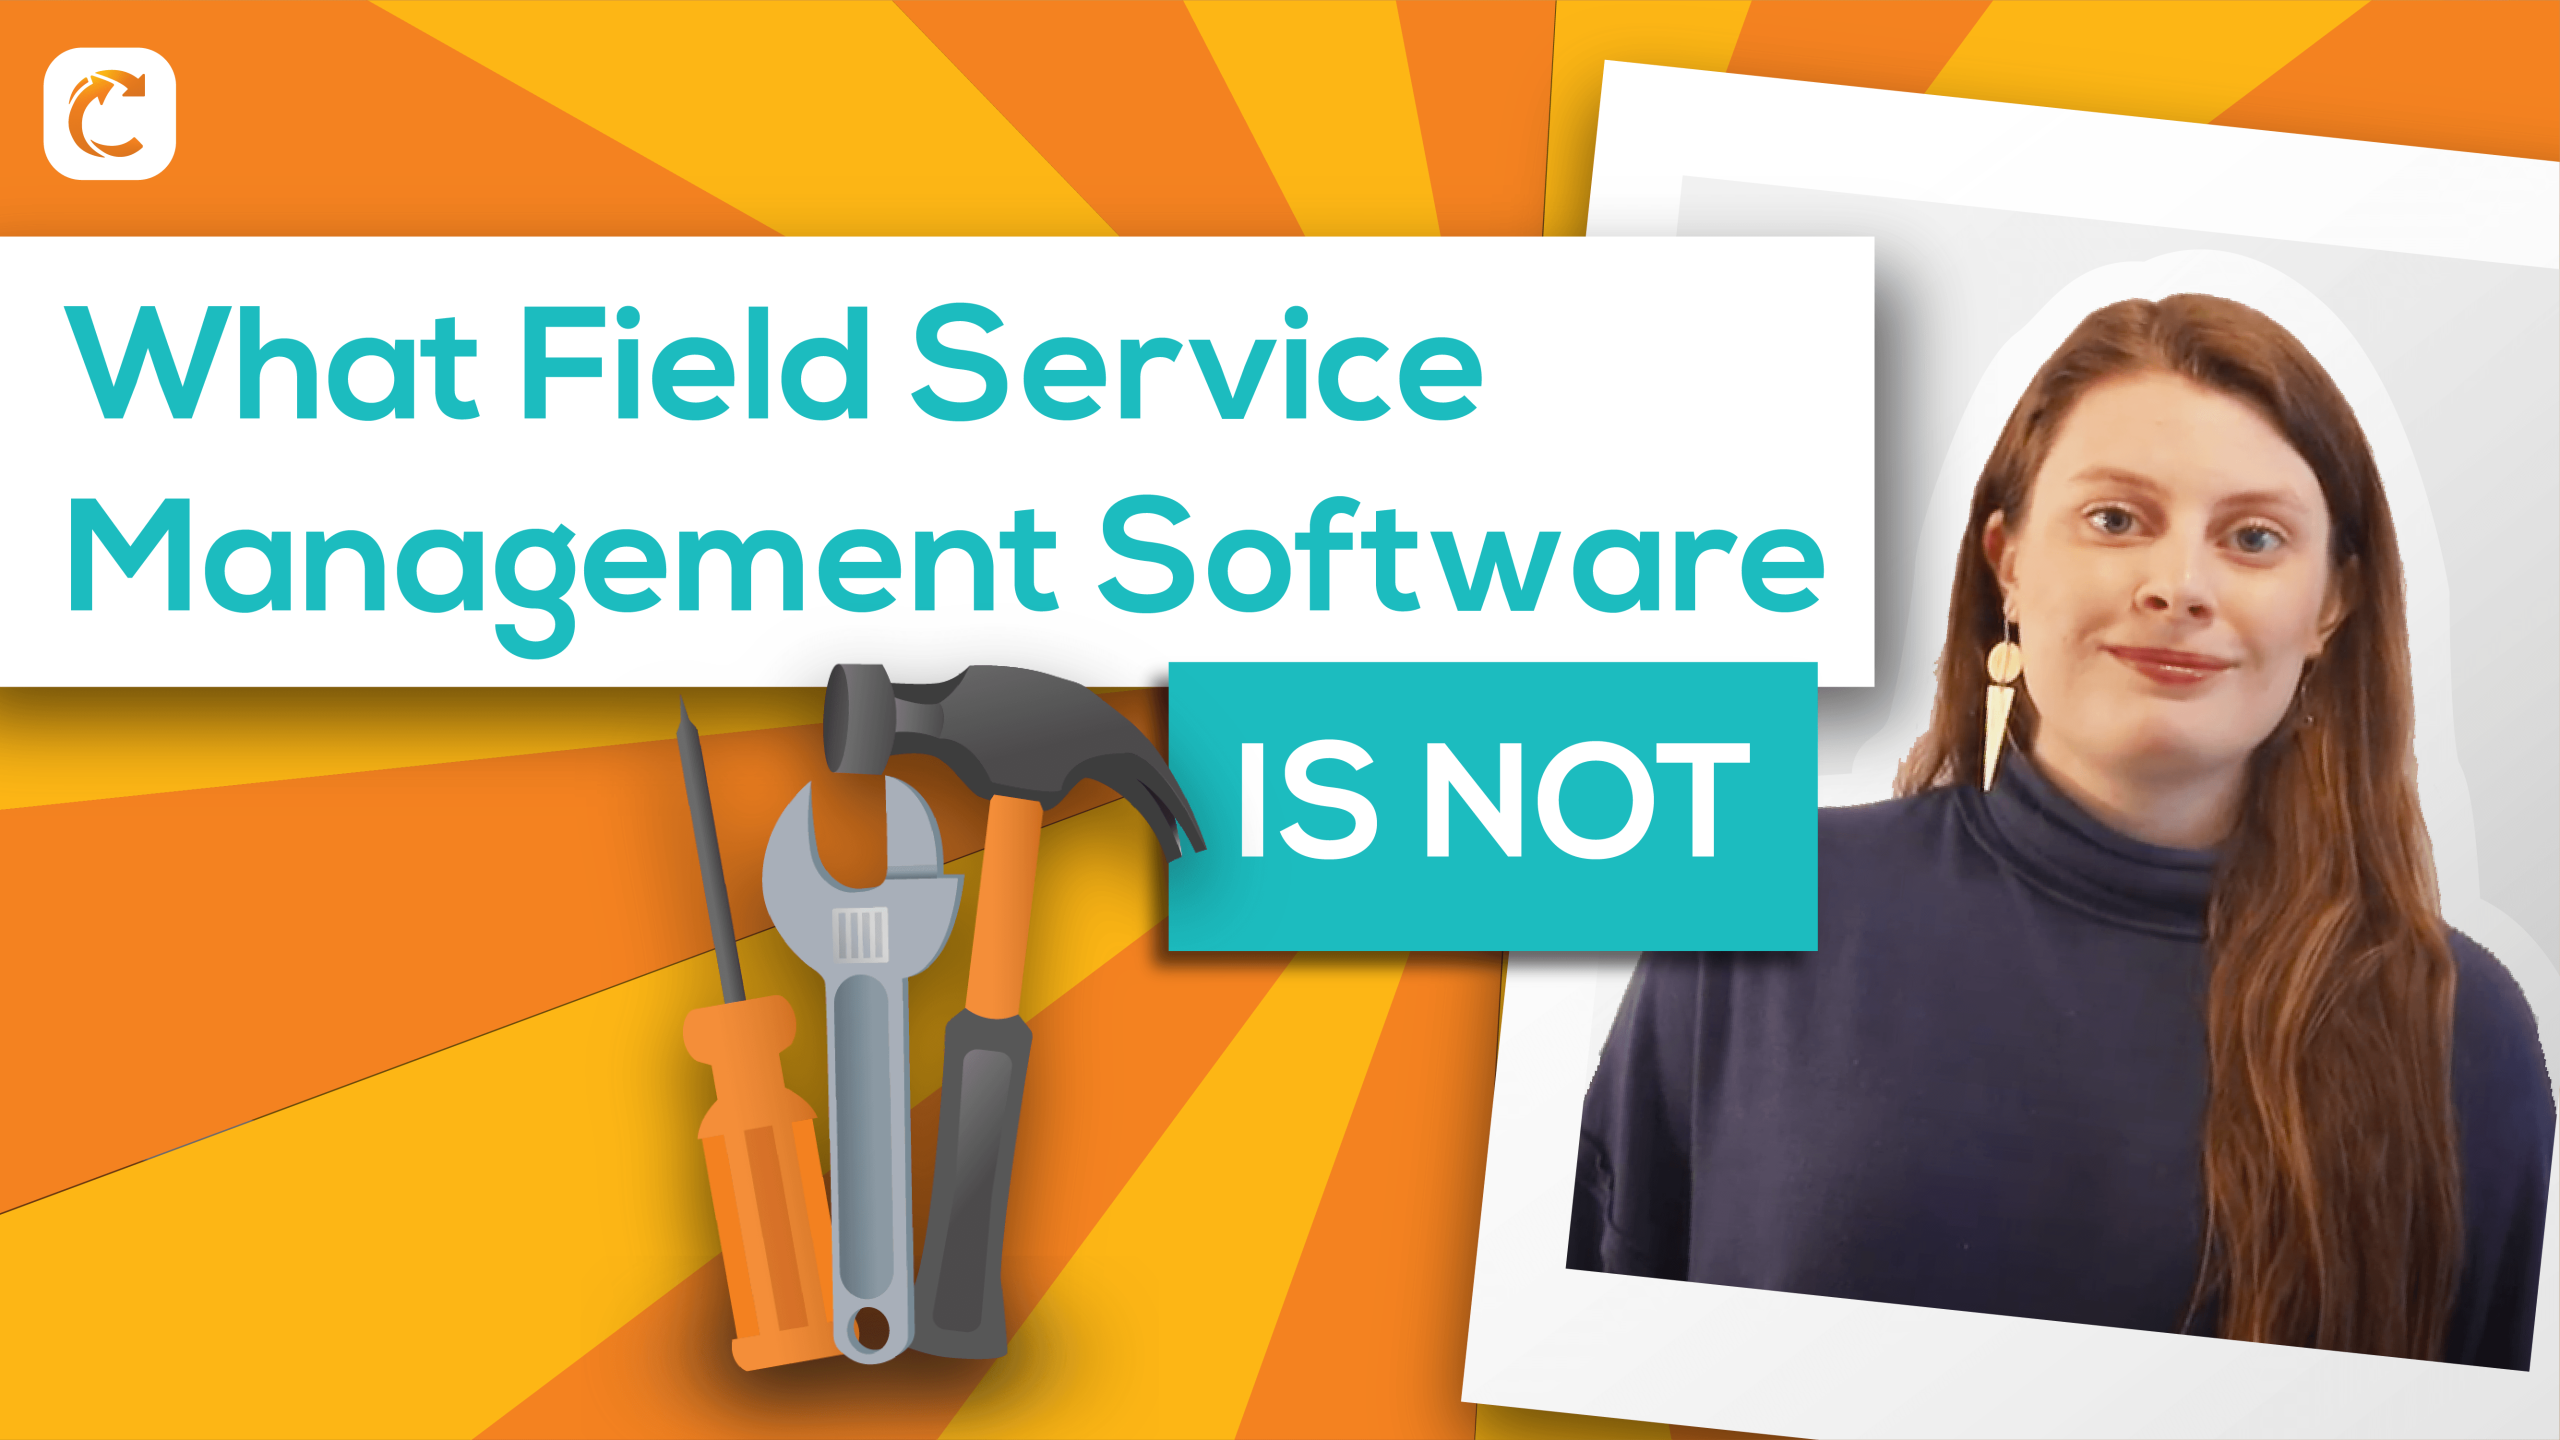 What Field Service Management Software is Not